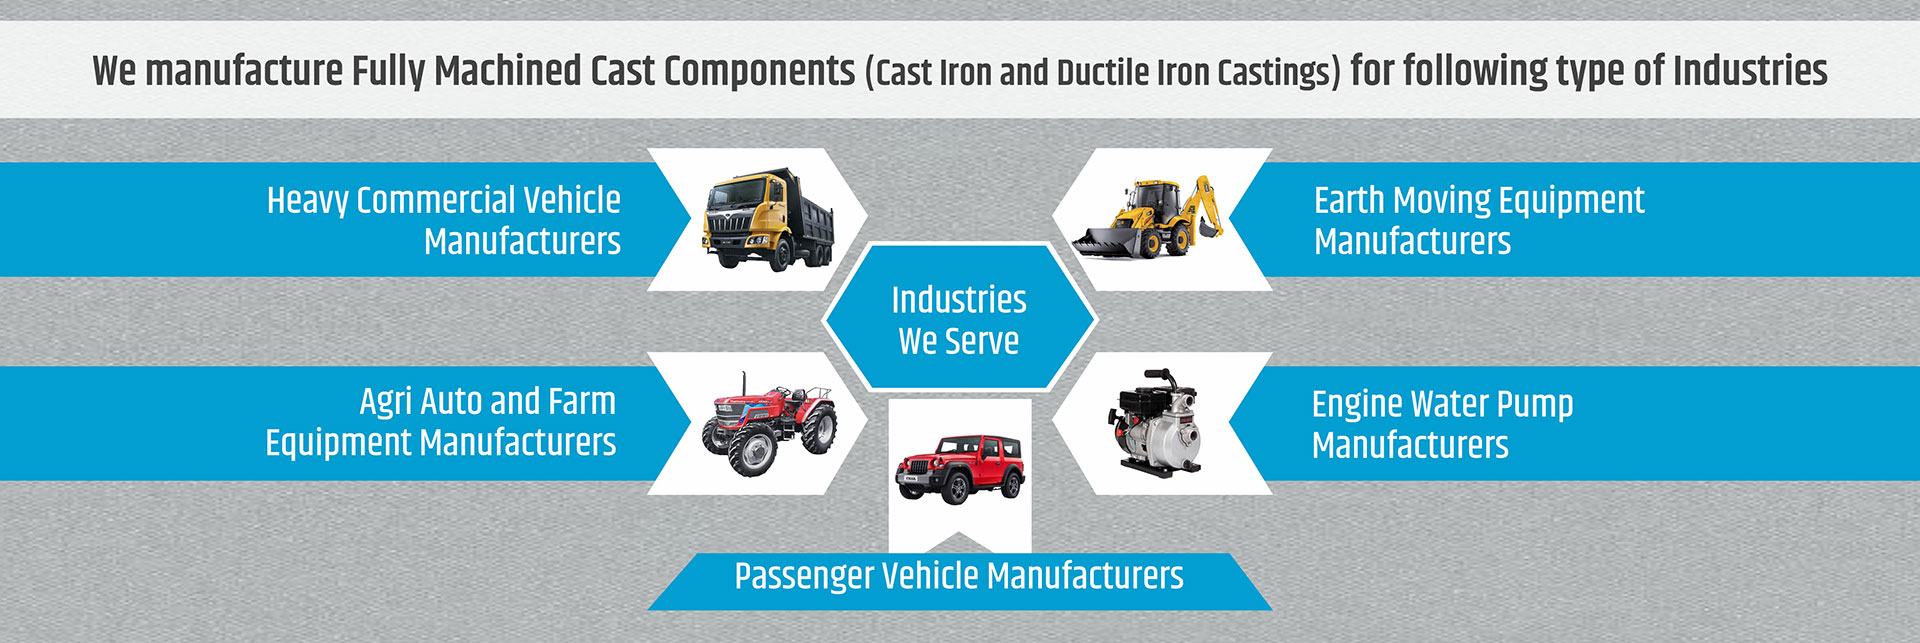 Manufactures of Graded Cast Iron, SG Iron Casting & Machined Components